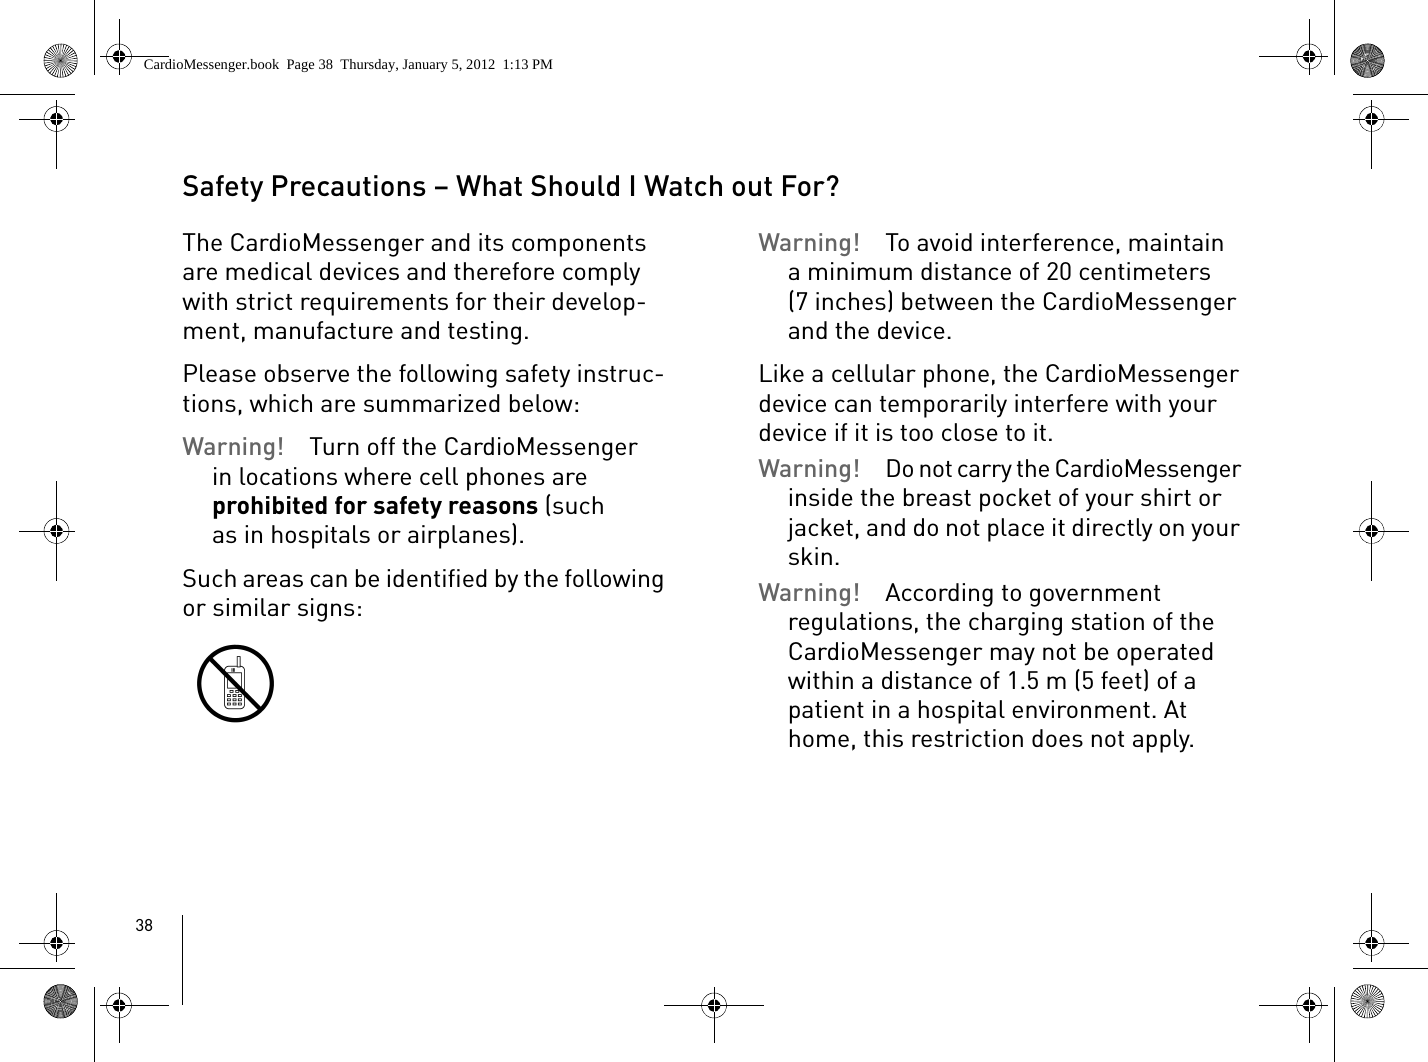 38Safety Precautions – What Should I Watch out For?The CardioMessenger and its components are medical devices and therefore comply with strict requirements for their develop-ment, manufacture and testing. Please observe the following safety instruc-tions, which are summarized below: Warning!  Turn off the CardioMessenger in locations where cell phones are prohibited for safety reasons (such as in hospitals or airplanes). Such areas can be identified by the following or similar signs:Warning!  To avoid interference, maintain a minimum distance of 20 centimeters (7 inches) between the CardioMessenger and the device. Like a cellular phone, the CardioMessenger device can temporarily interfere with your device if it is too close to it. Warning! Do not carry the CardioMessenger inside the breast pocket of your shirt or jacket, and do not place it directly on your skin.Warning!  According to government regulations, the charging station of the CardioMessenger may not be operated within a distance of 1.5 m (5 feet) of a patient in a hospital environment. At home, this restriction does not apply.CardioMessenger.book  Page 38  Thursday, January 5, 2012  1:13 PM